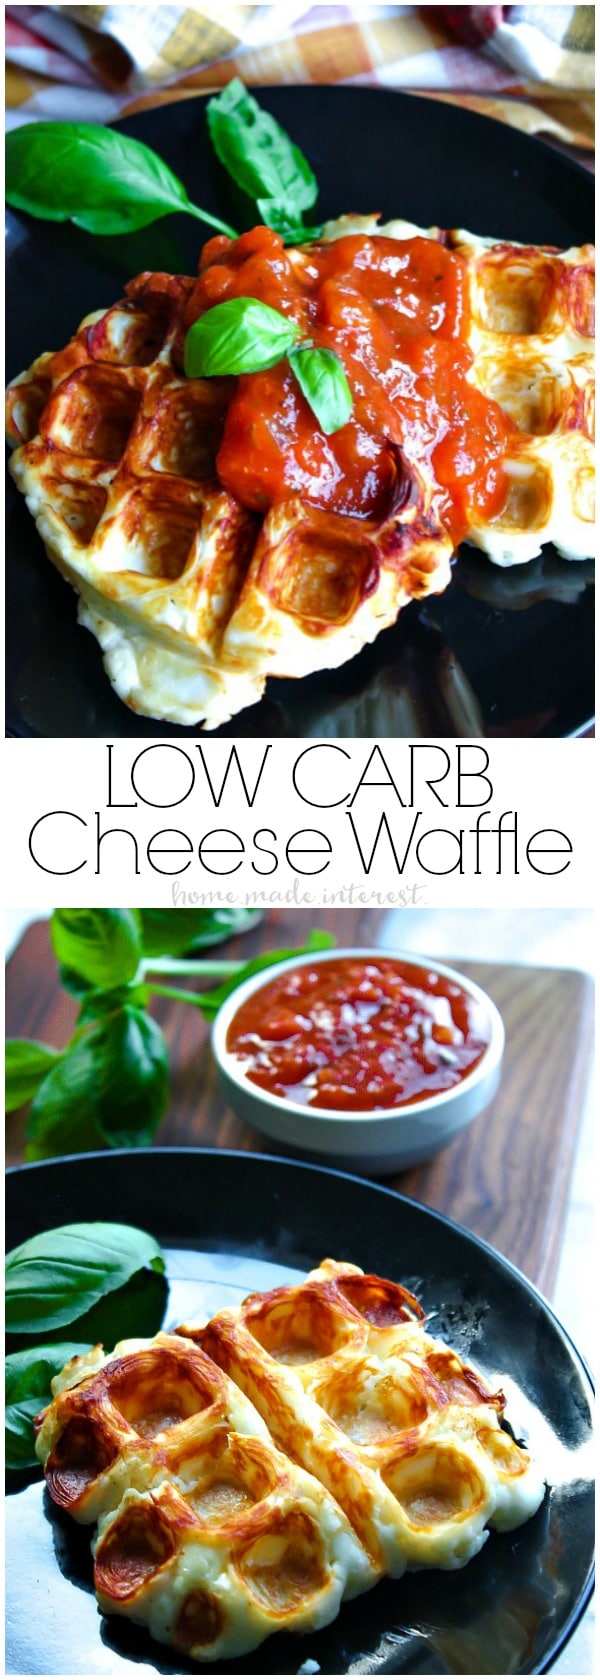 This Low Carb Cheese Waffle is made from gooey Halloumi cheese. Enjoy cheese waffles topped with your favorite low carb tomato sauce as a low carb cheese stick substitute. This is an easy low carb appetizer that totally fills that fried cheese craving!